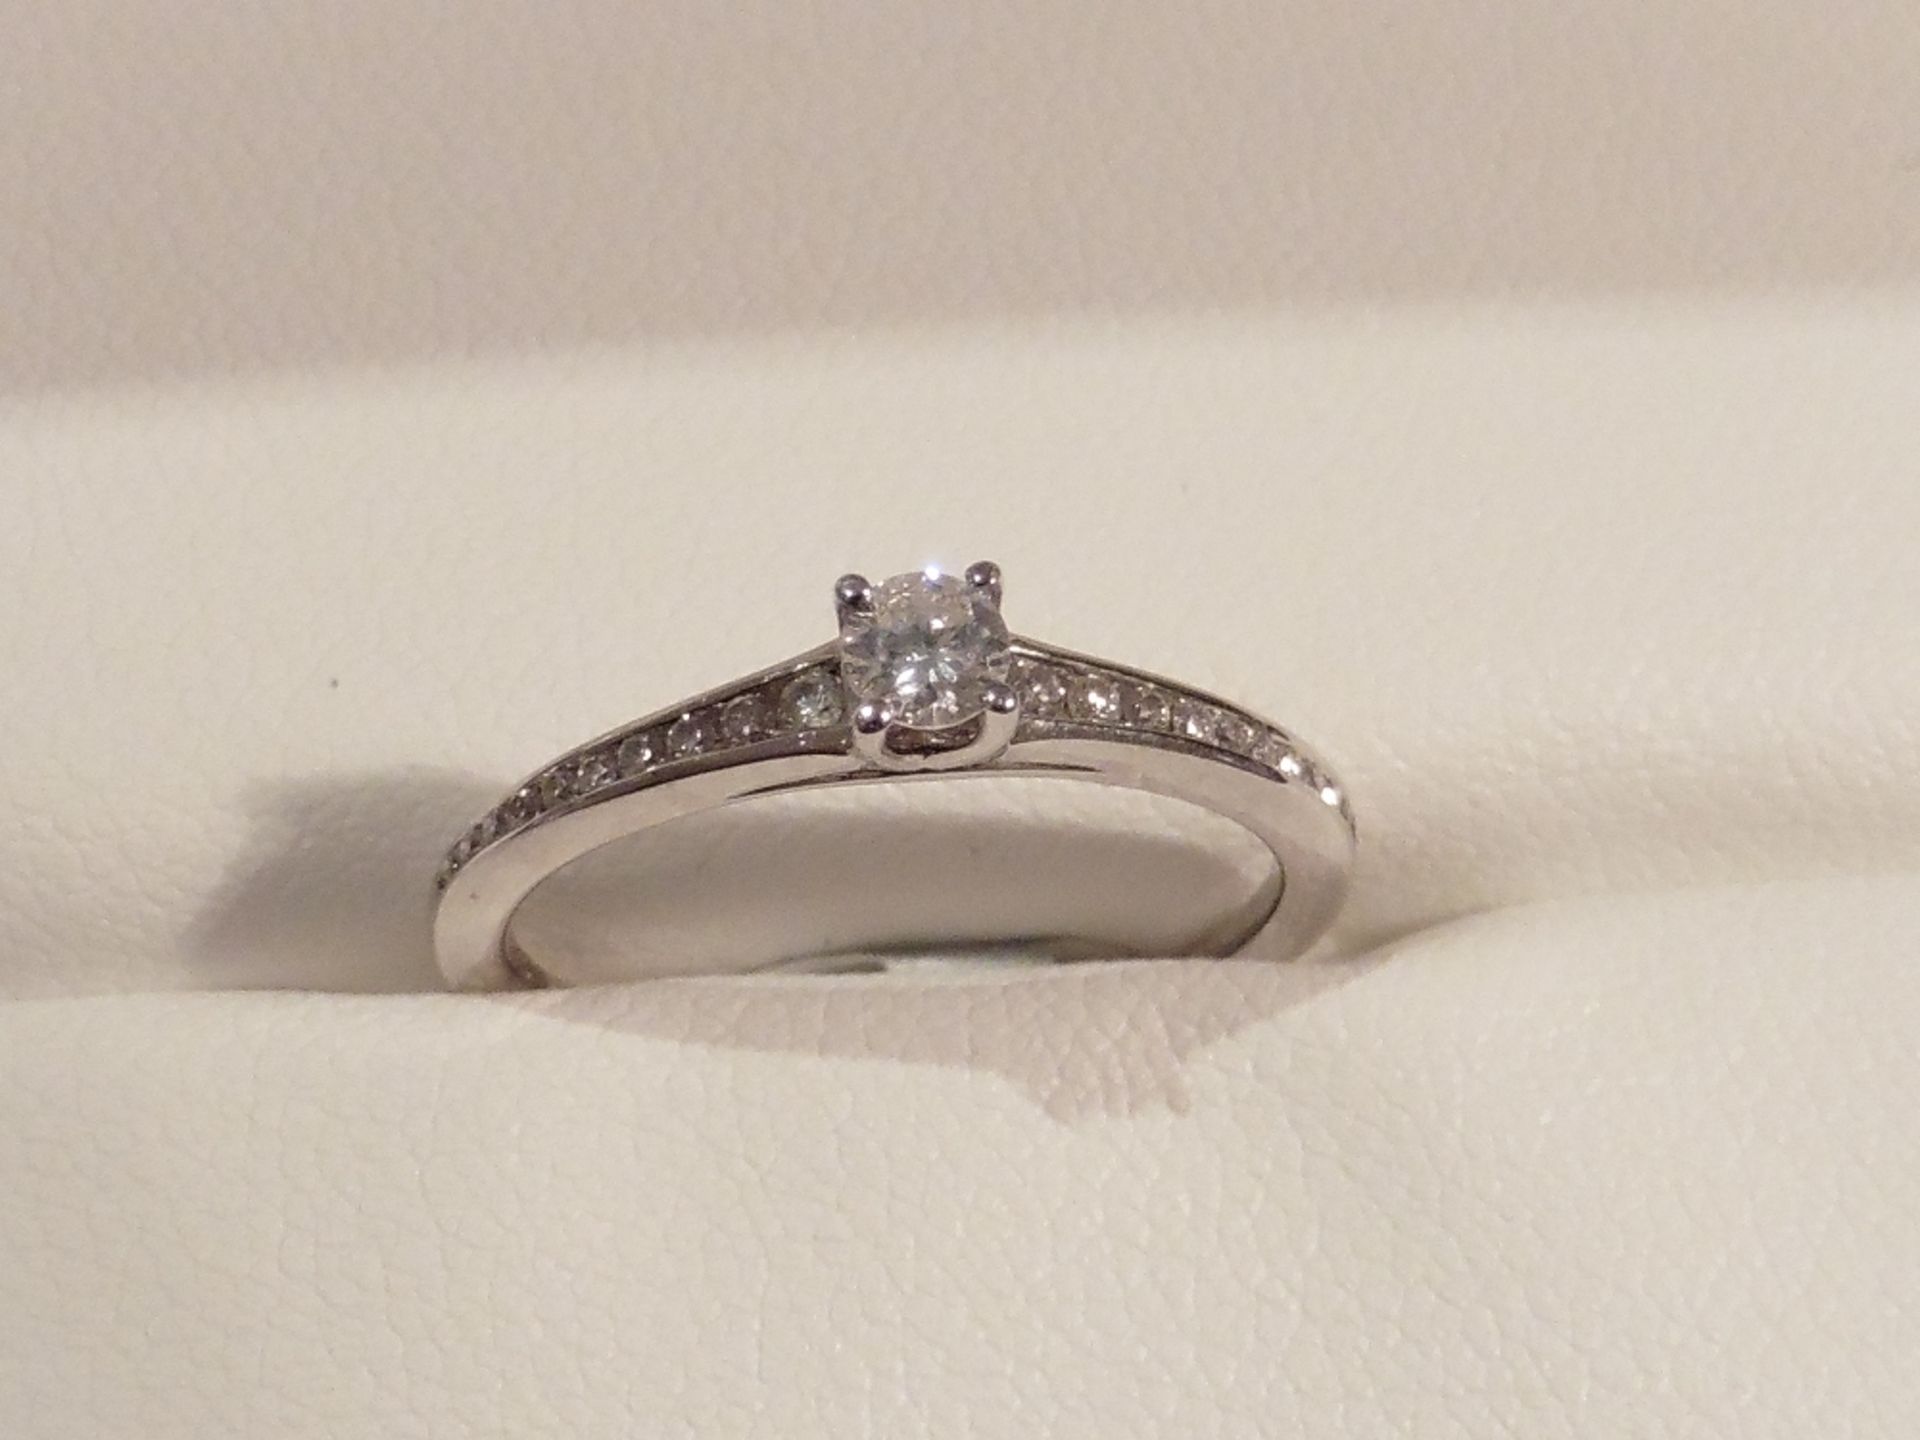 9ct white gold diamond set solitaire ring set with a single brilliant cut diamond weighing 0.15ct se